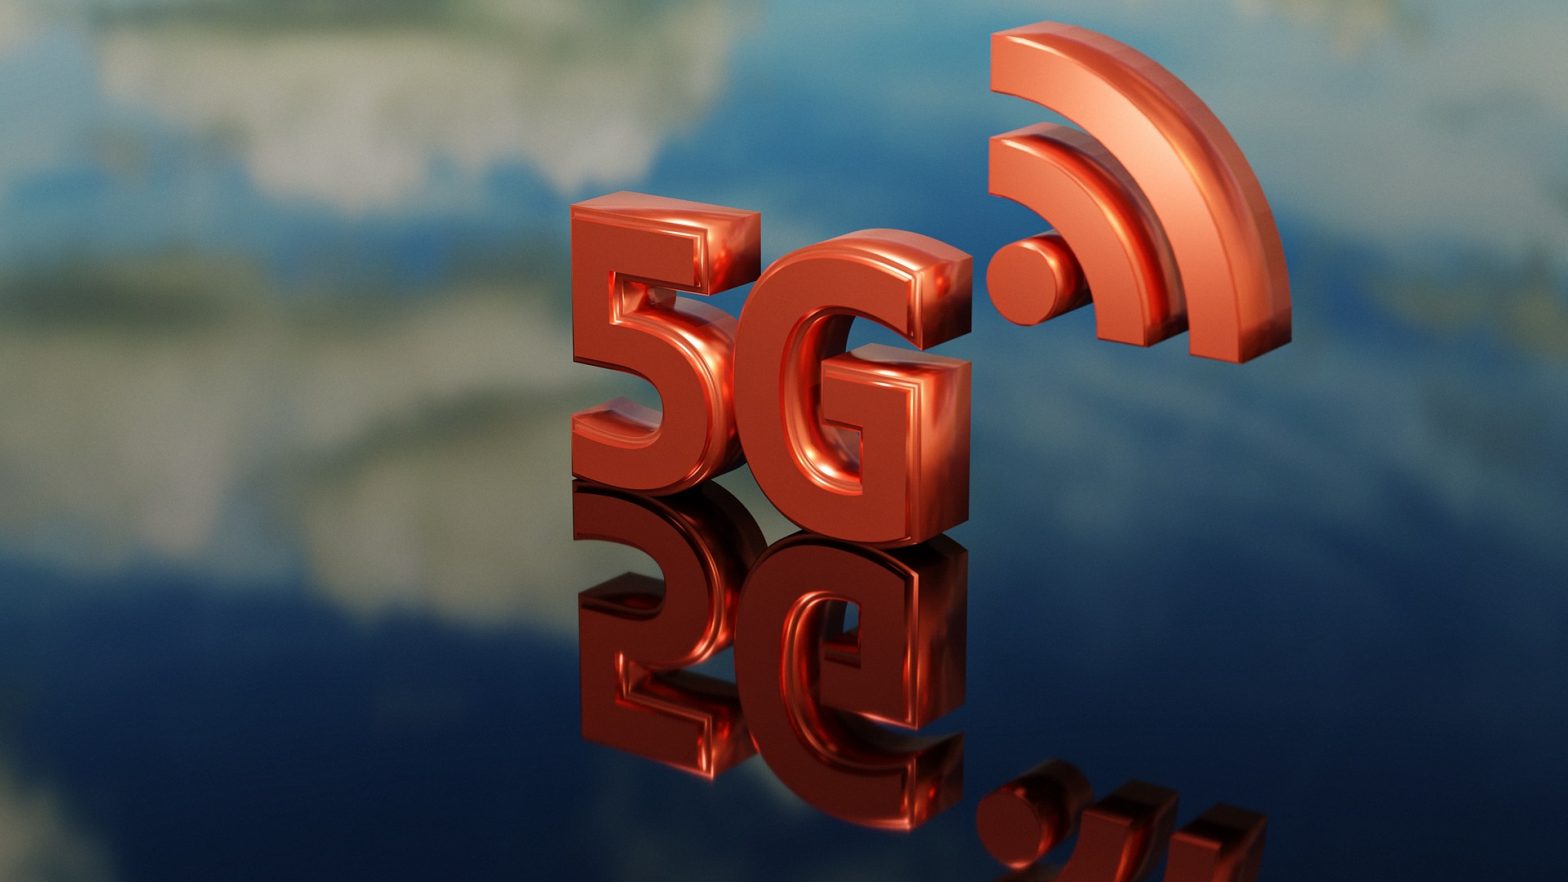 5G technology and its influence on modern life